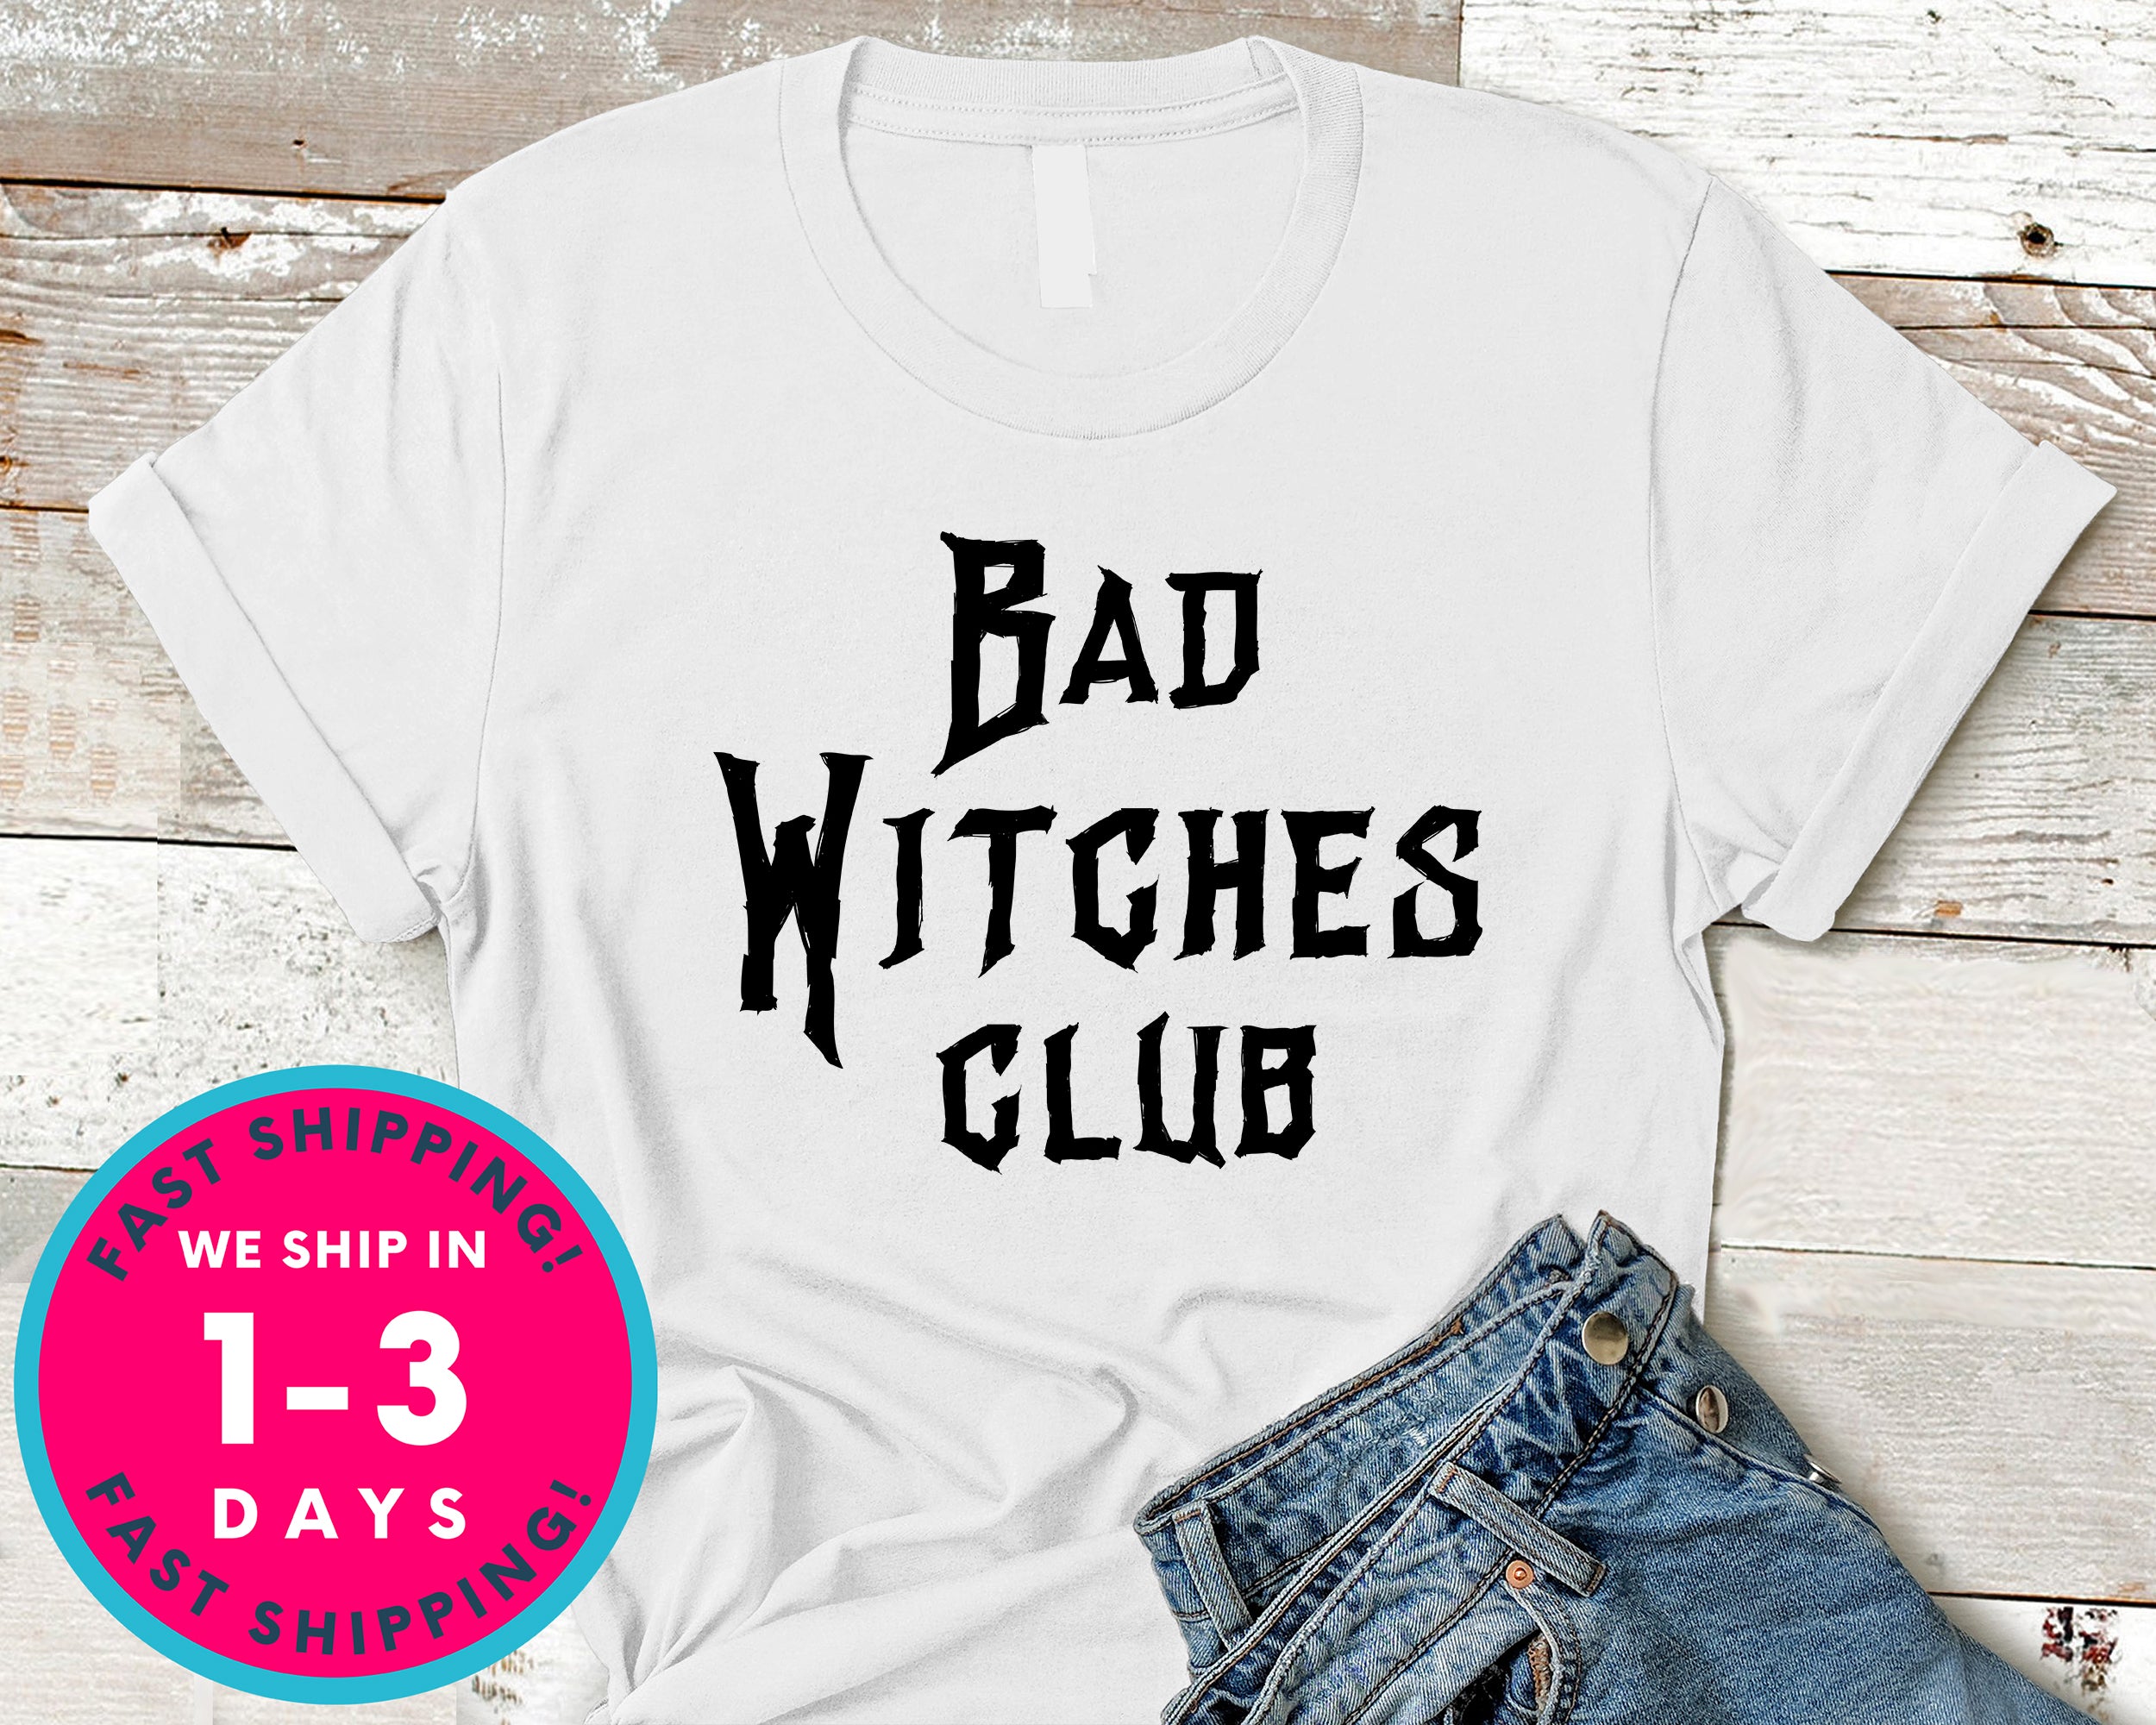 Bad Witches Club T-Shirt - Halloween Horror Scary Shirt